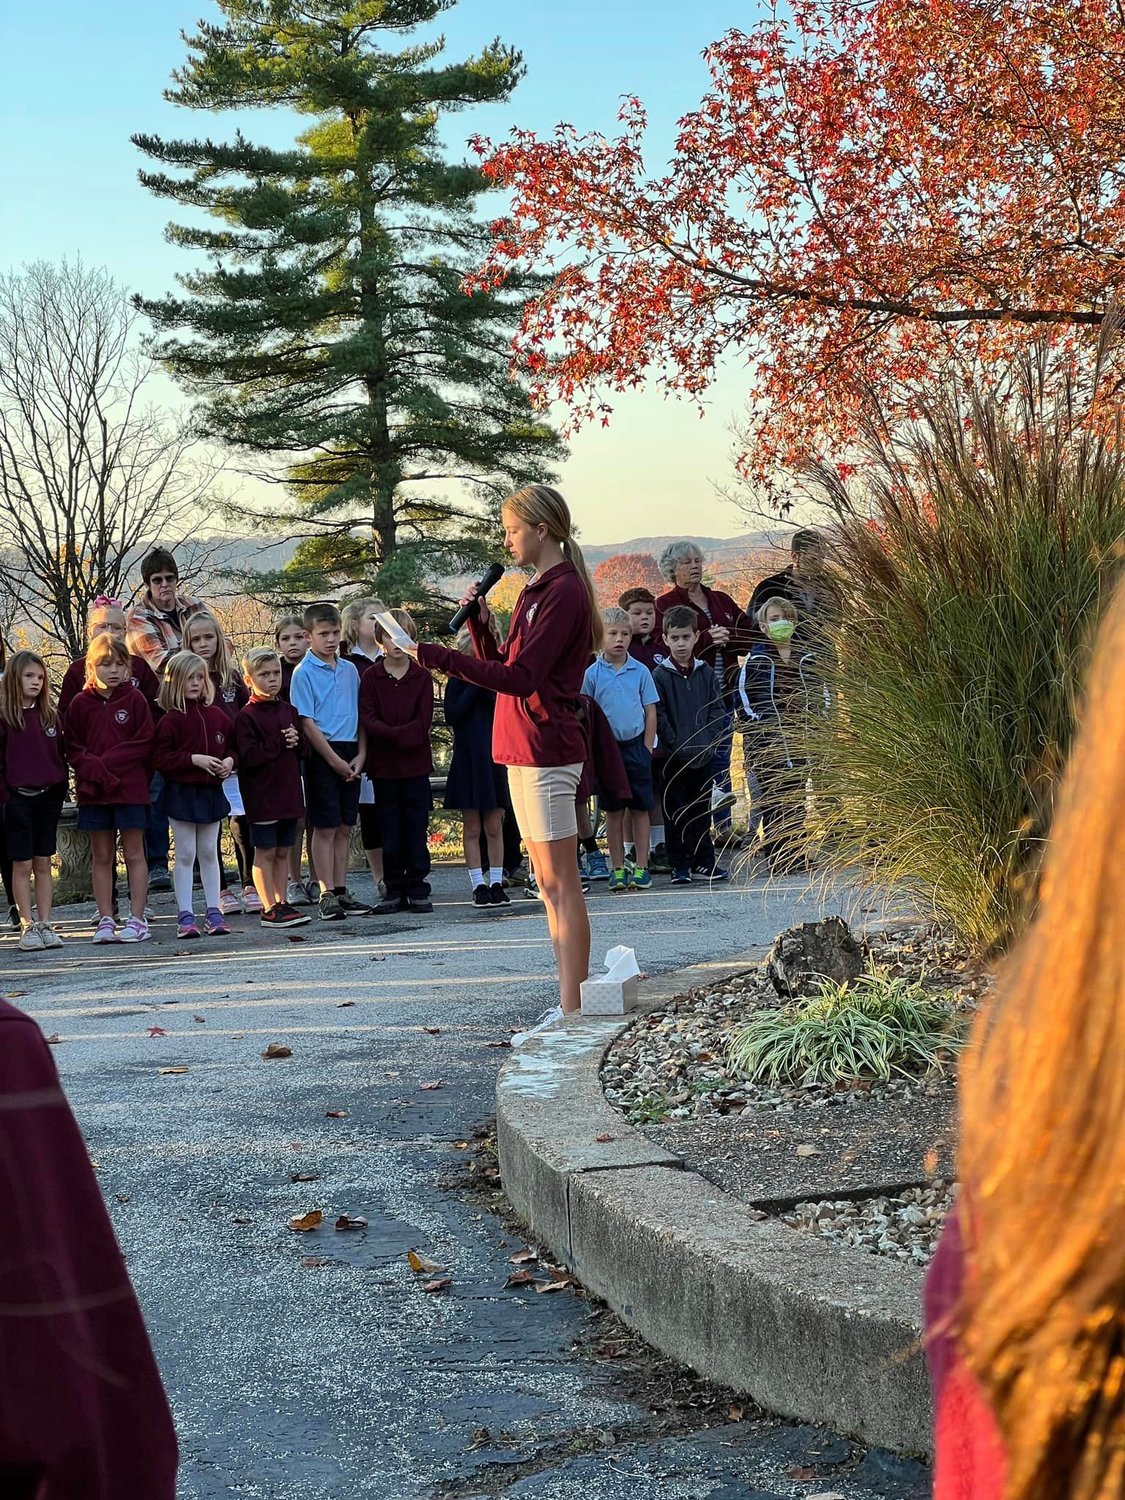 Students of St. George School in Hermann join Father Philip Niekamp, pastor of St. George Parish in Hermann and Church of the Risen Savior Parish in Rhineland, for Mass in St. George Cemetery in Hermann for All Souls Day.